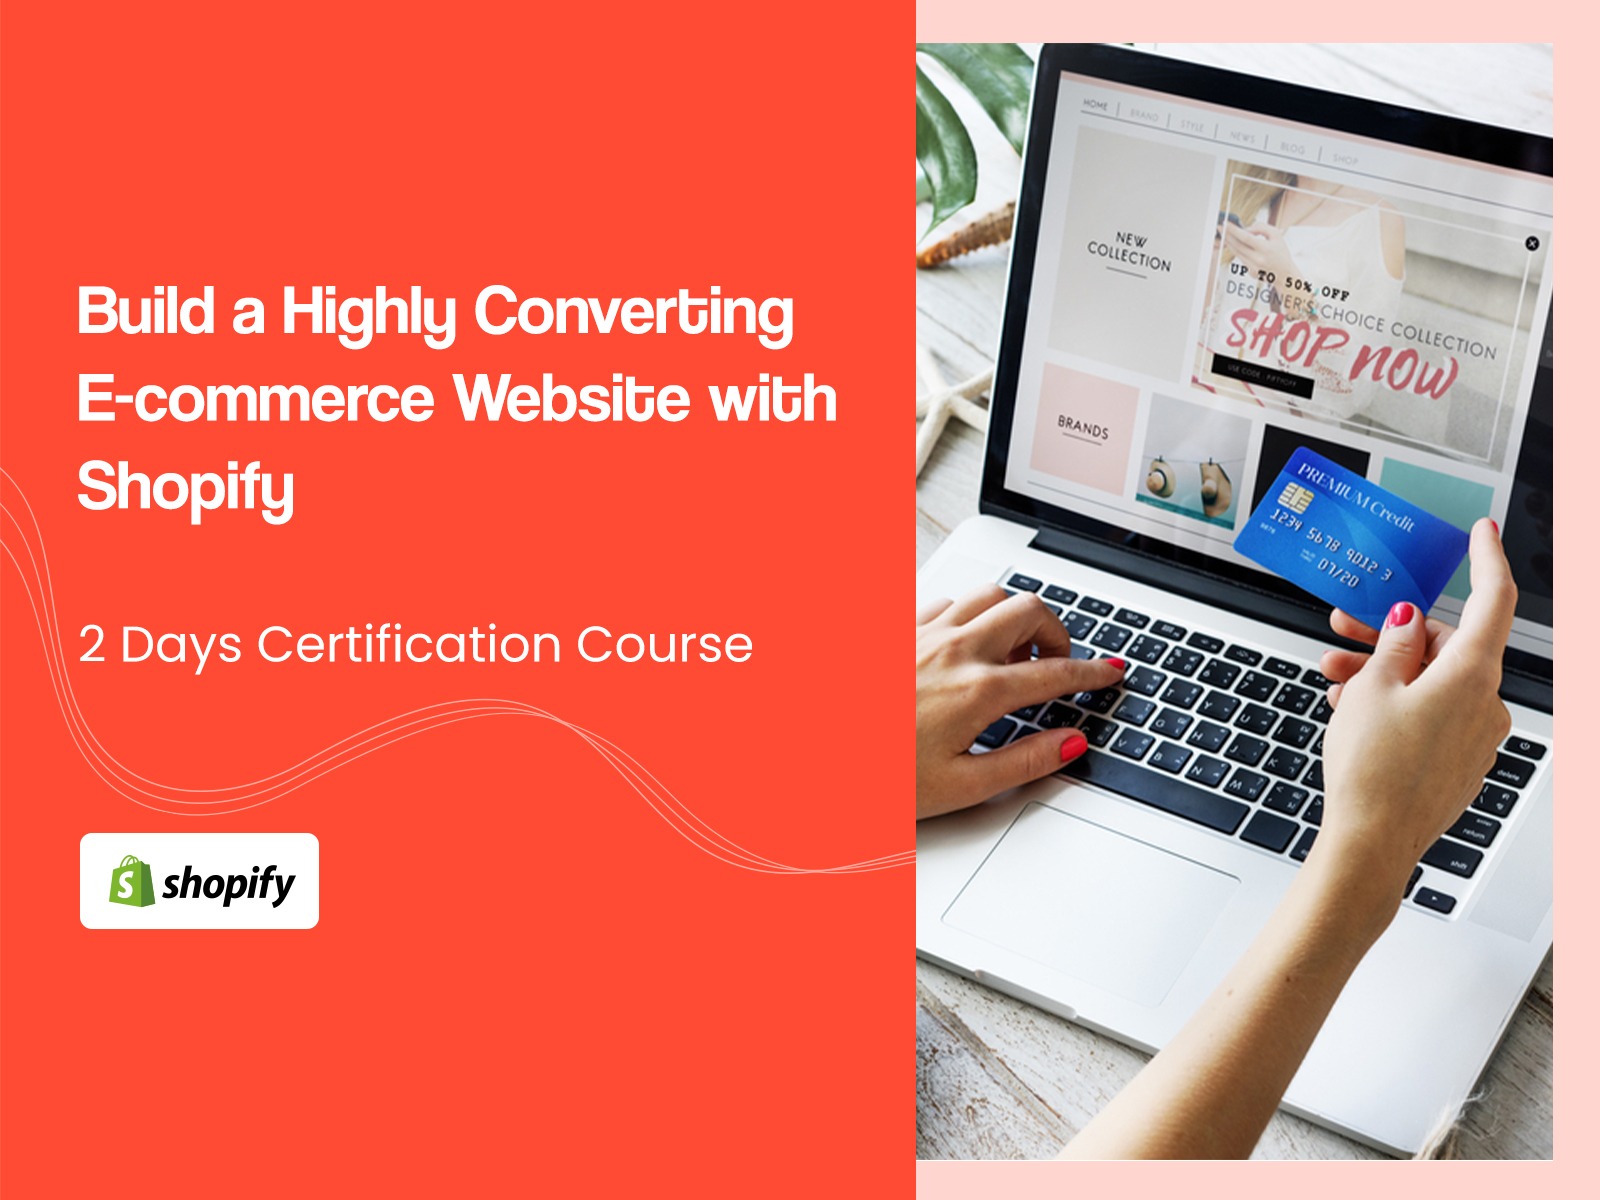 Build a Highly Converting E-commerce Website with Shopify course in Singapore